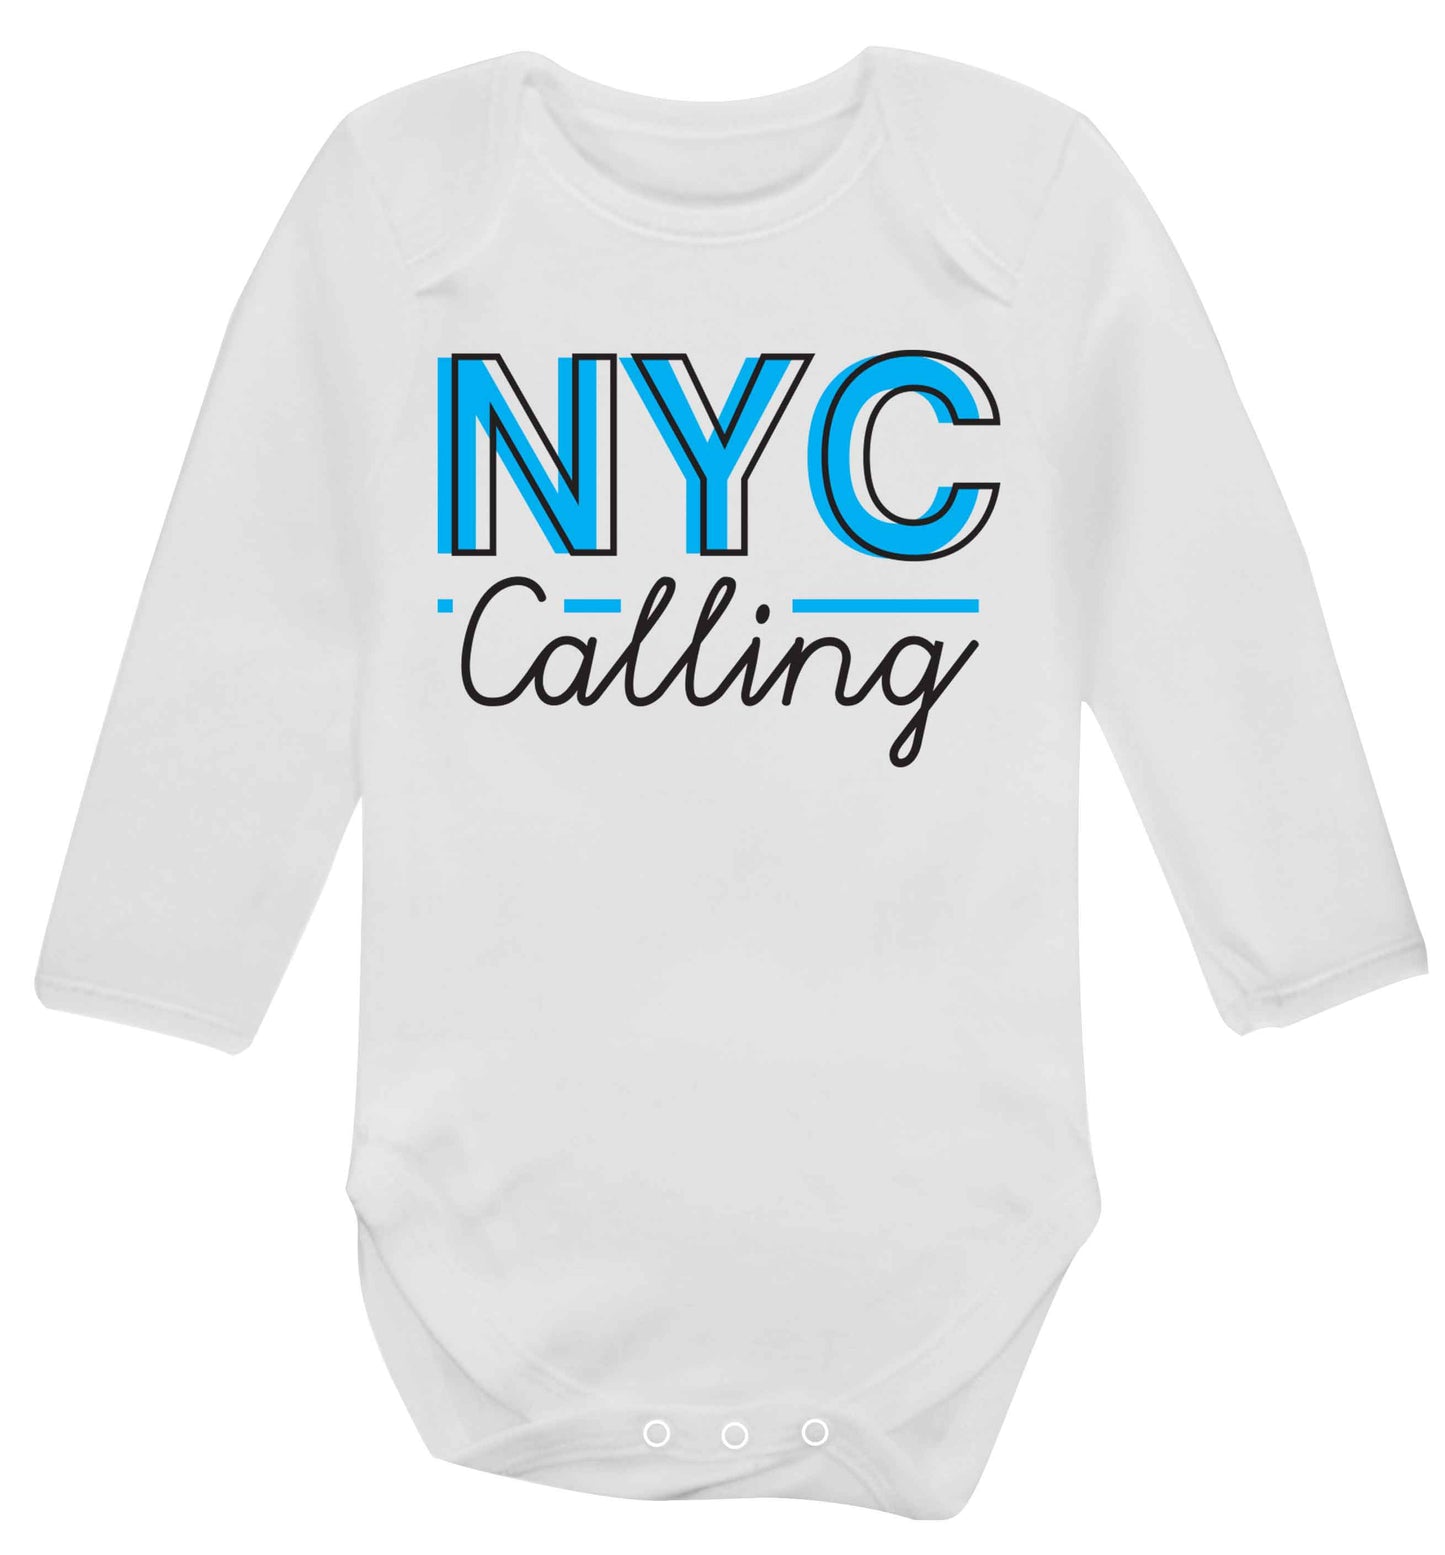 NYC calling Baby Vest long sleeved white 6-12 months